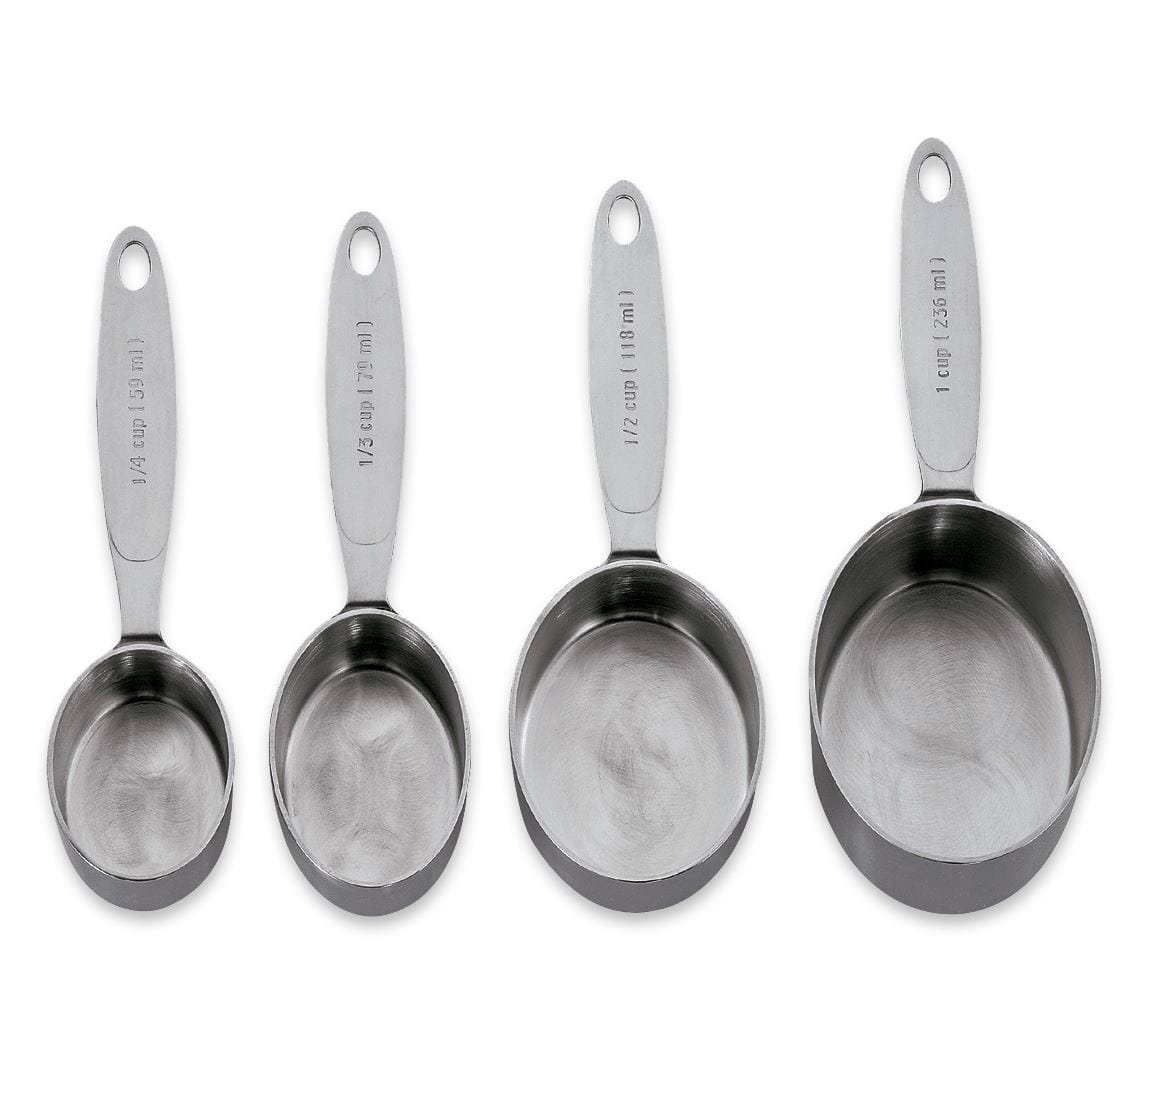 Le Creuset Stainless Steel Measuring Cups, Set of 4